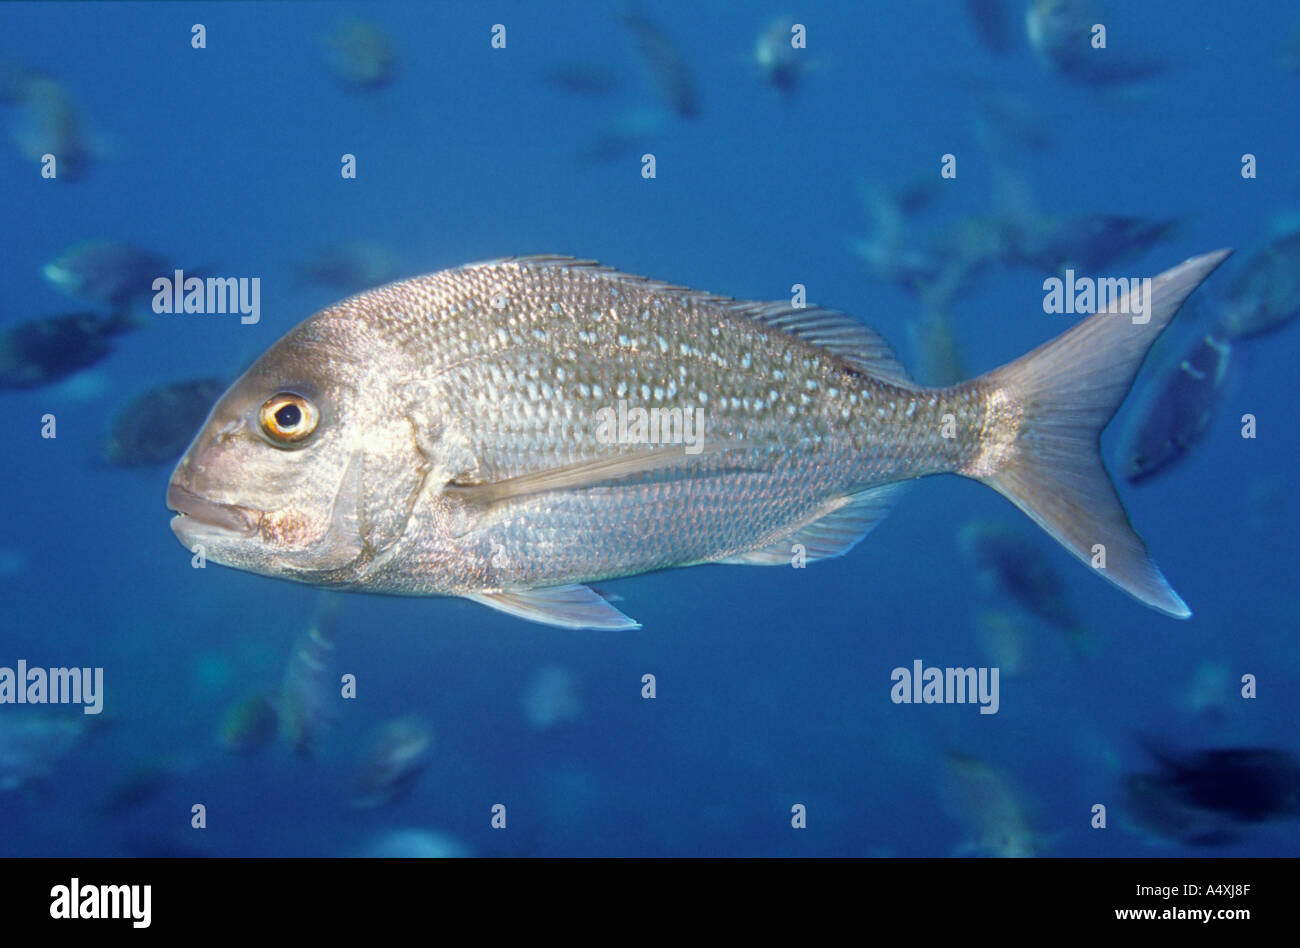 Underwater view of large snapper in clear blue water Chrysophrys auratus Stock Photo